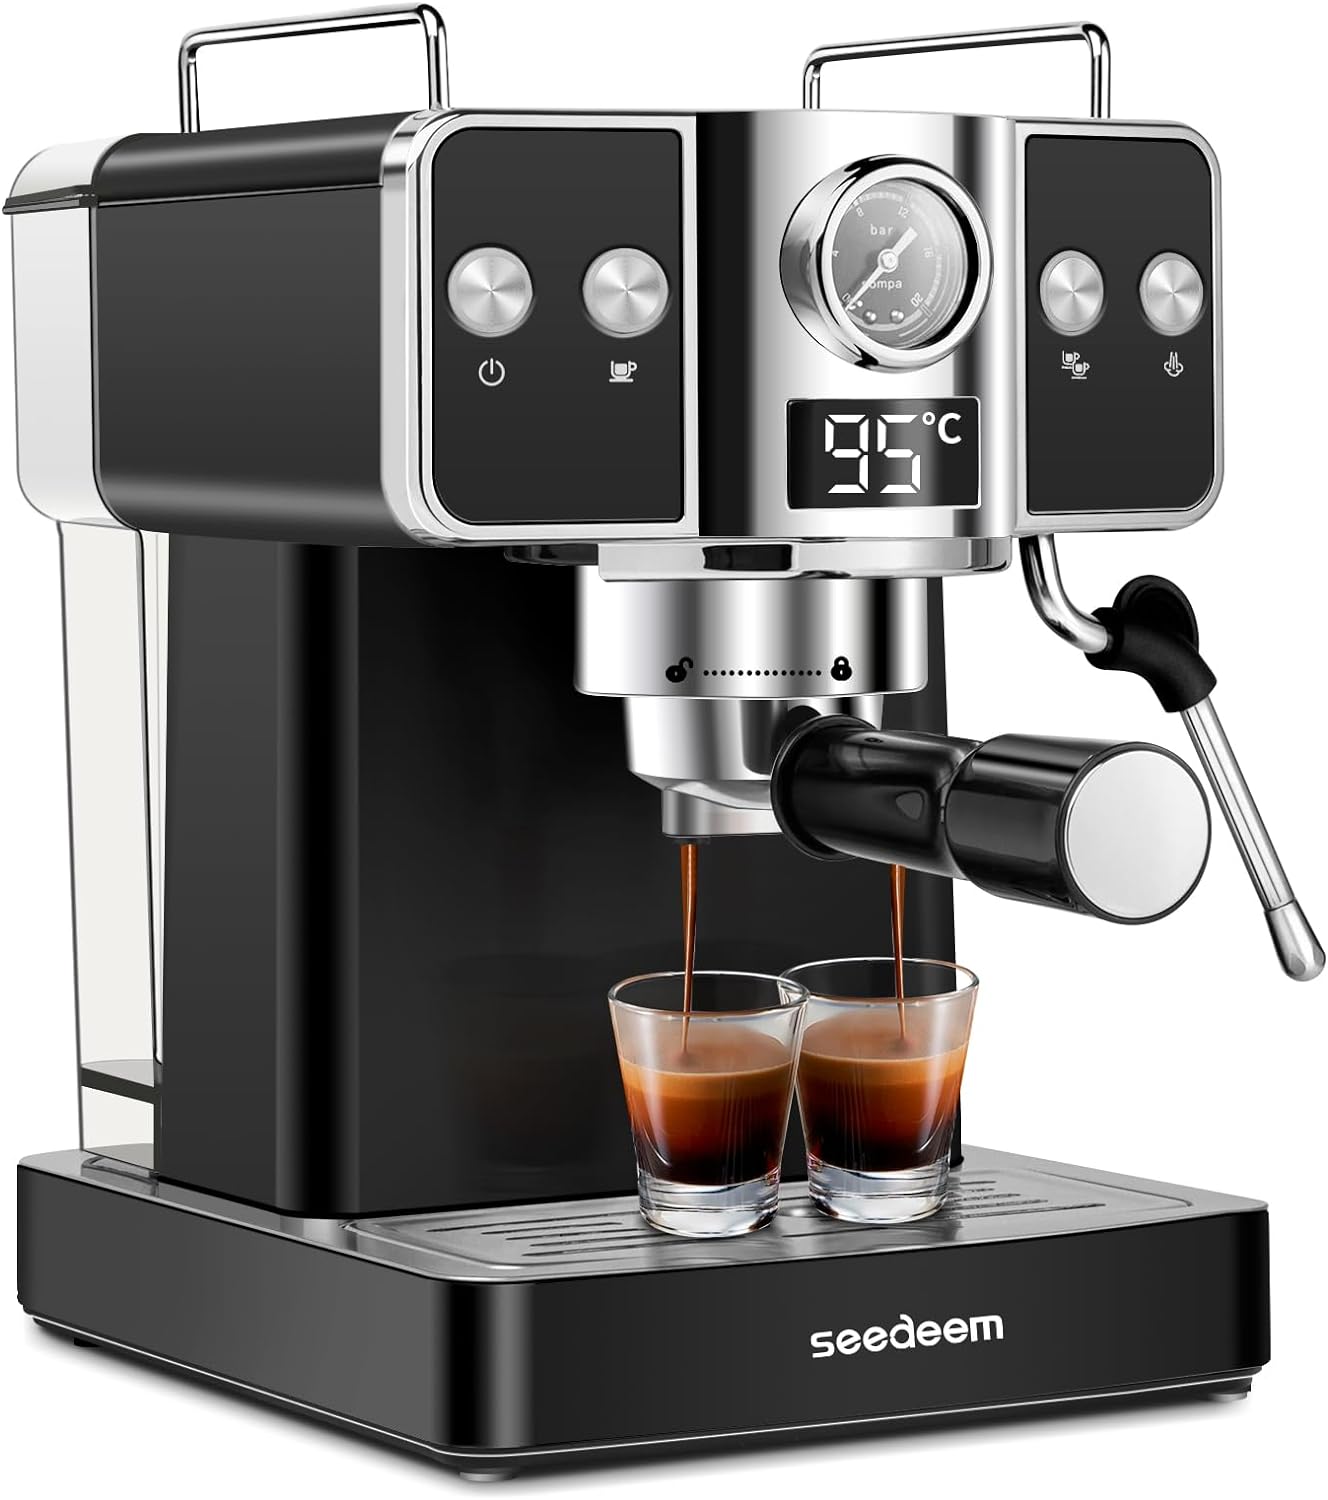 SEEDEEM Espresso Machine,20 Bar Espresso Maker with Milk Frother,Stainless Steel Latte and Cappuccino Machine with 1.8L(60 Fl Oz) Removable Water Tank